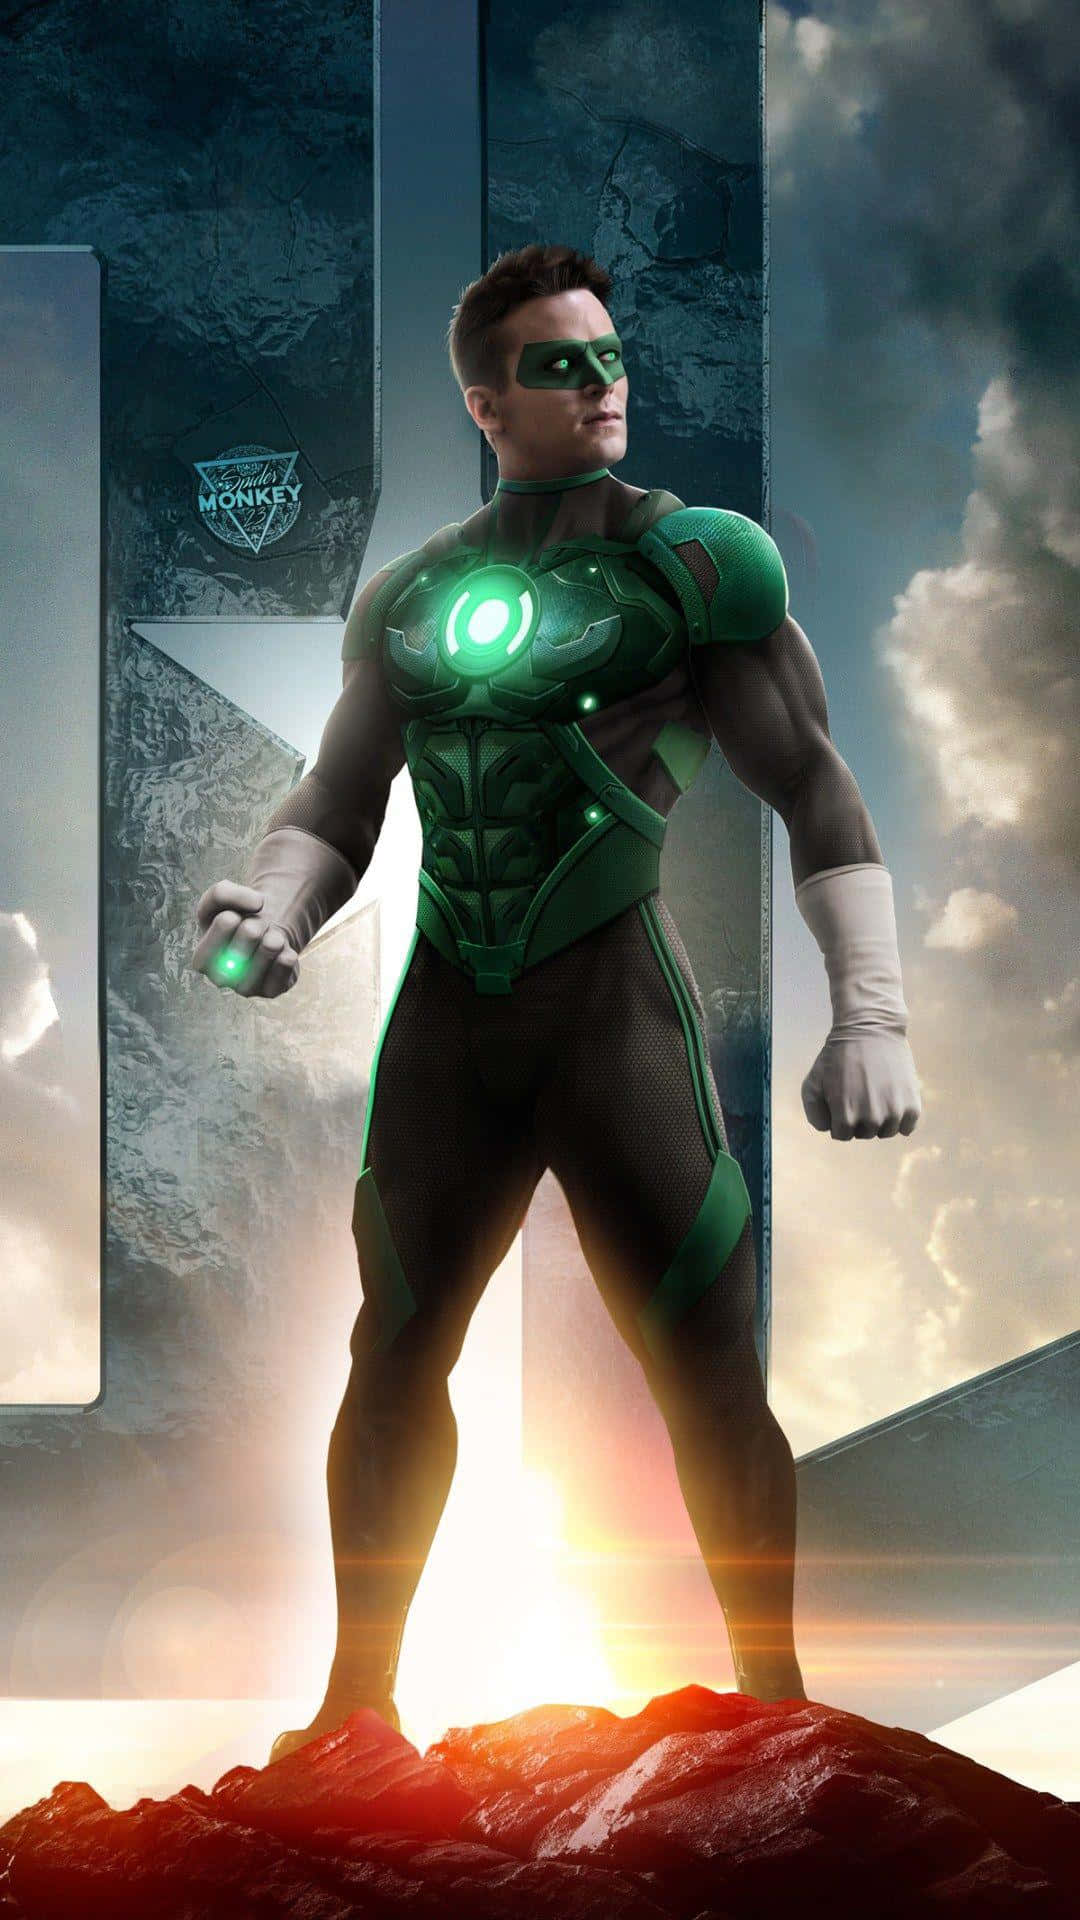 The strength of will of the powerful Green Lantern!